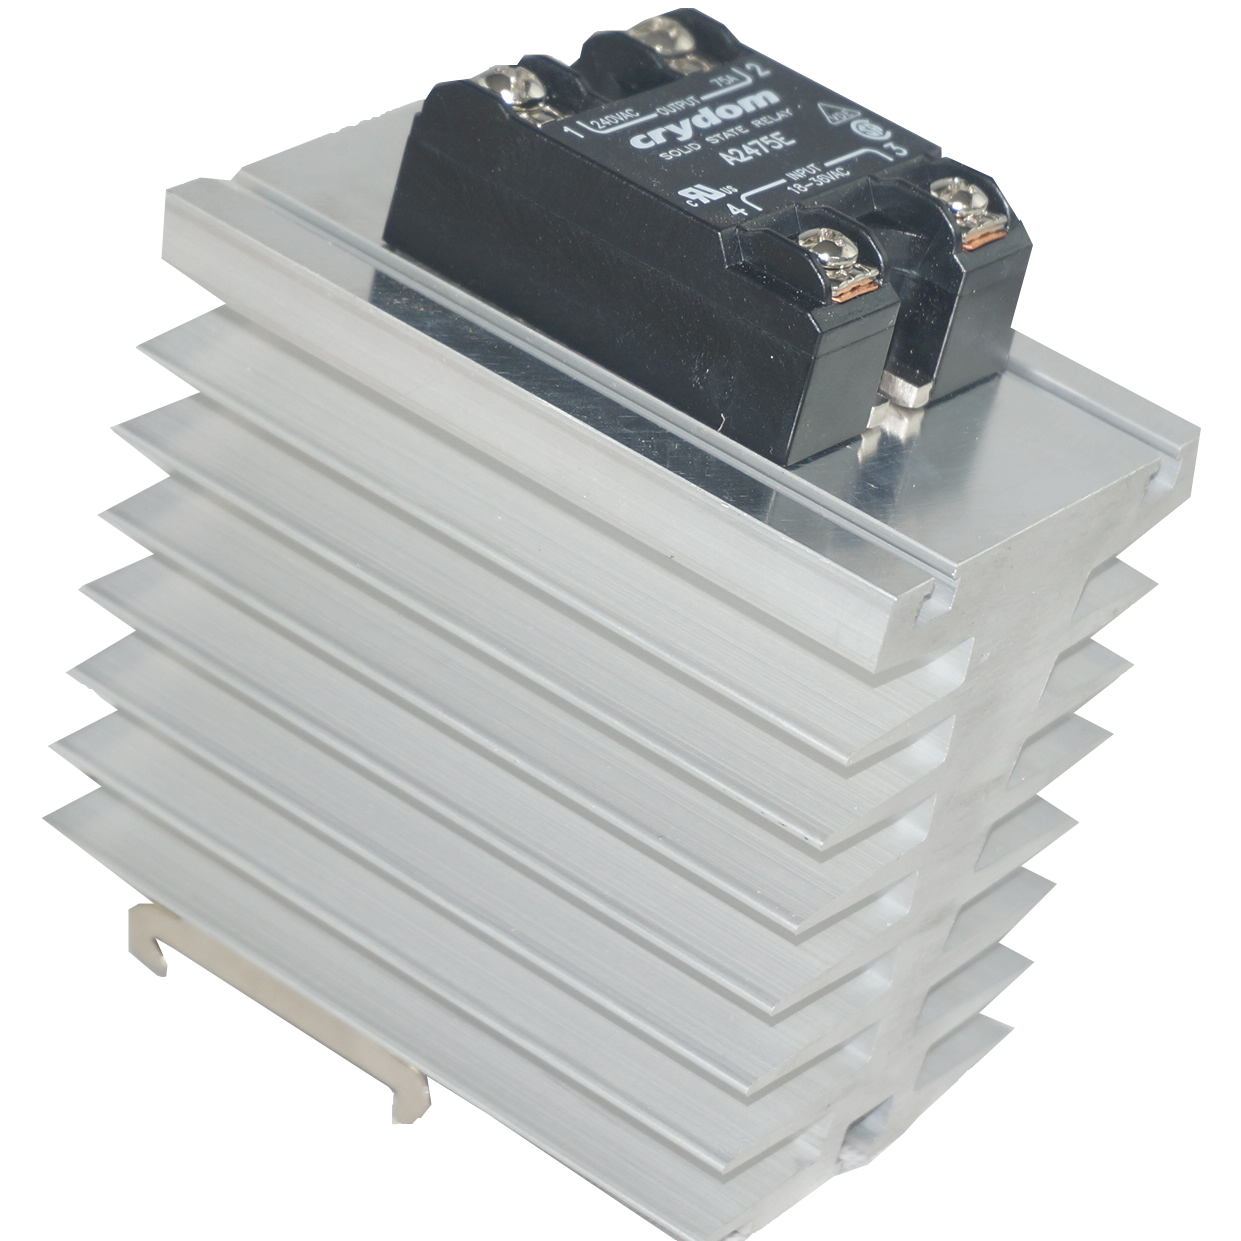 GFIN/100M-DR + D1D40, Din Rail Mount DC Solid State Relay with Heatsink 4-32VDC control, 34A @ 40 Deg C, 100VDC Load